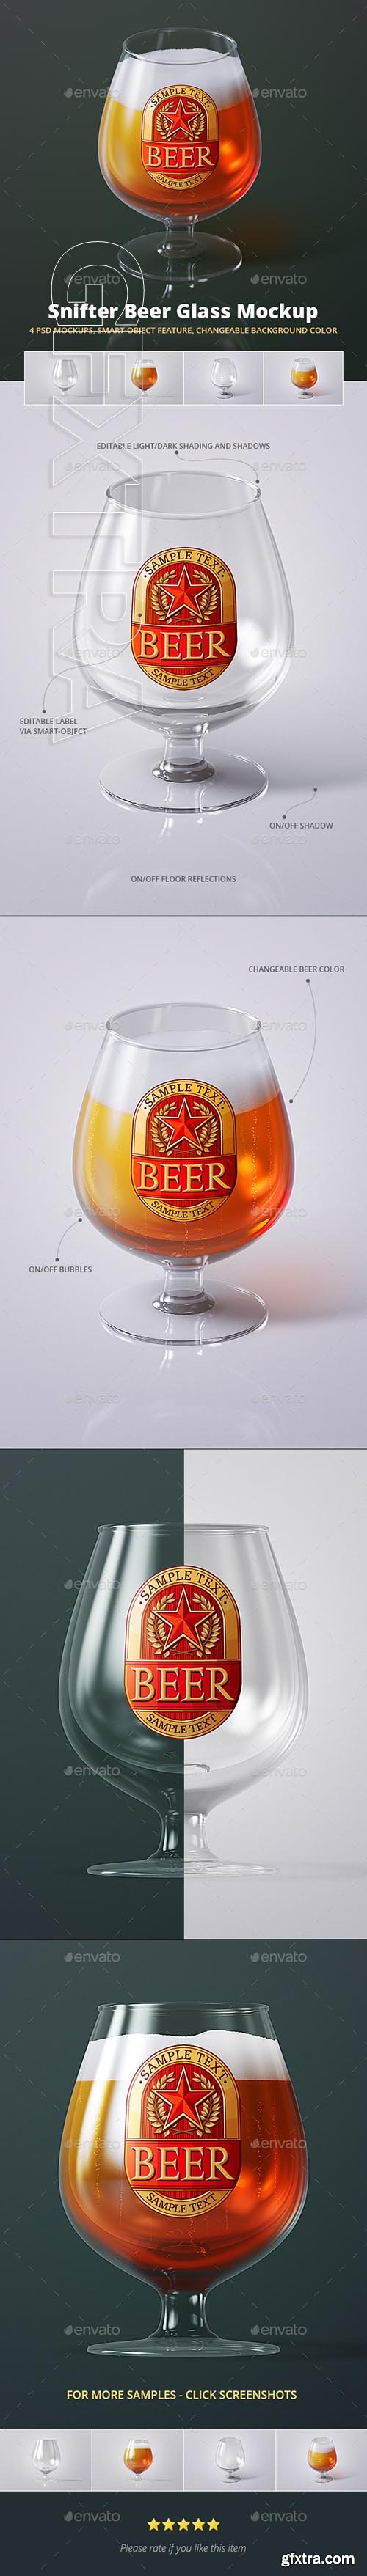 GraphicRiver - Beer Glass Mock-up - Snifter 21479691